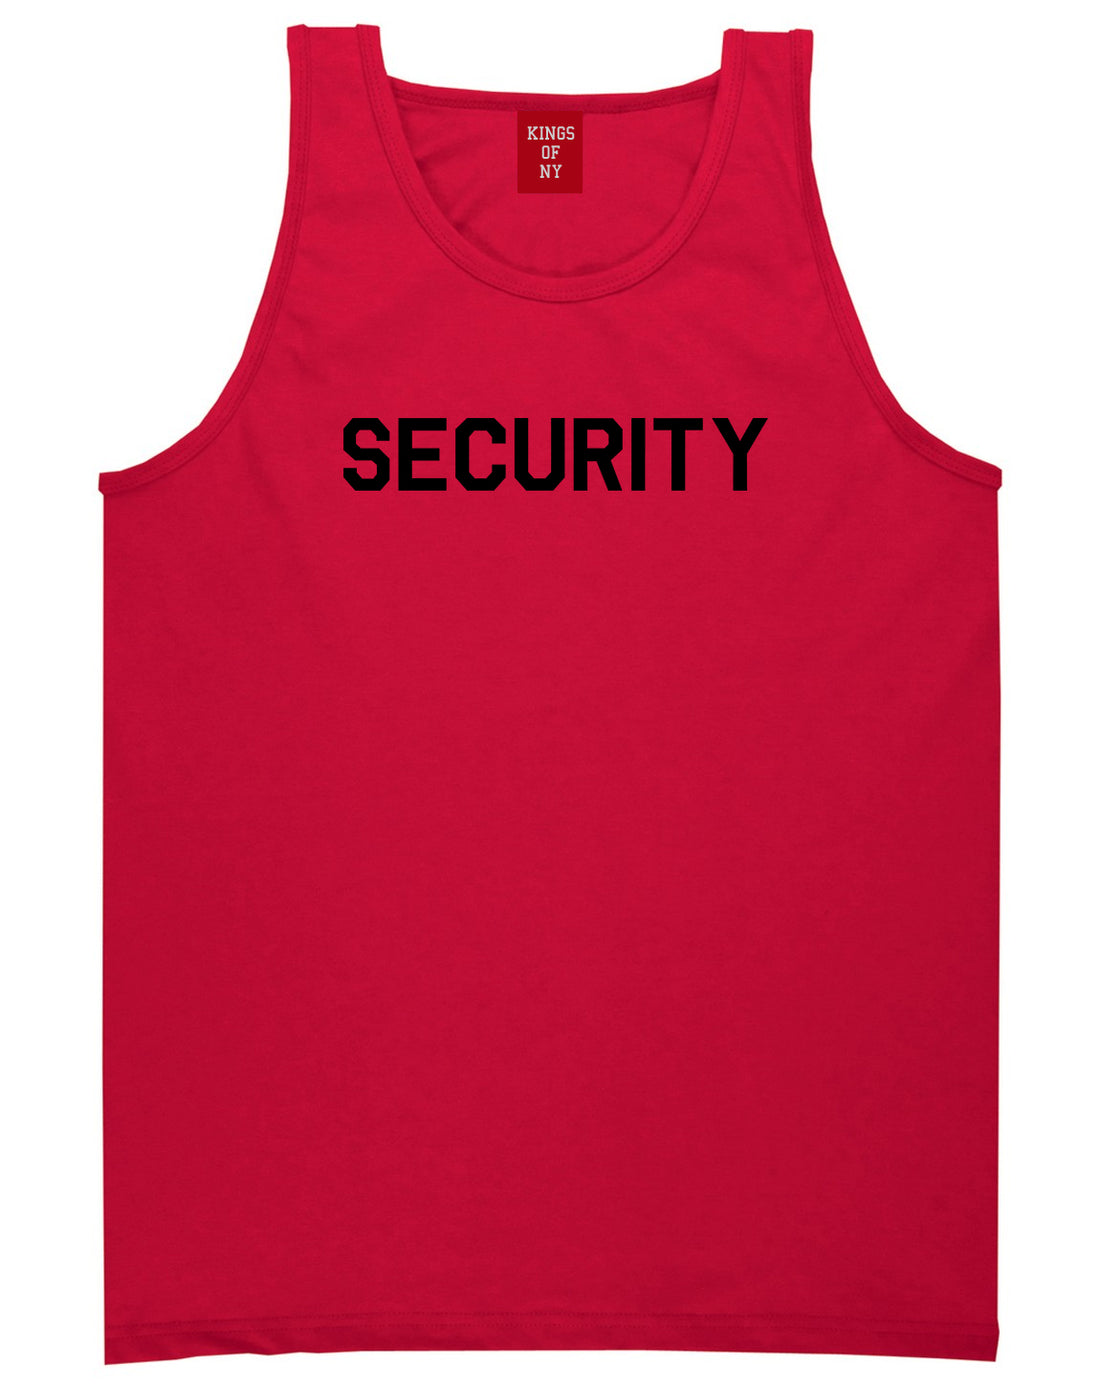 Event Security Uniform Mens Red Tank Top Shirt by KINGS OF NY